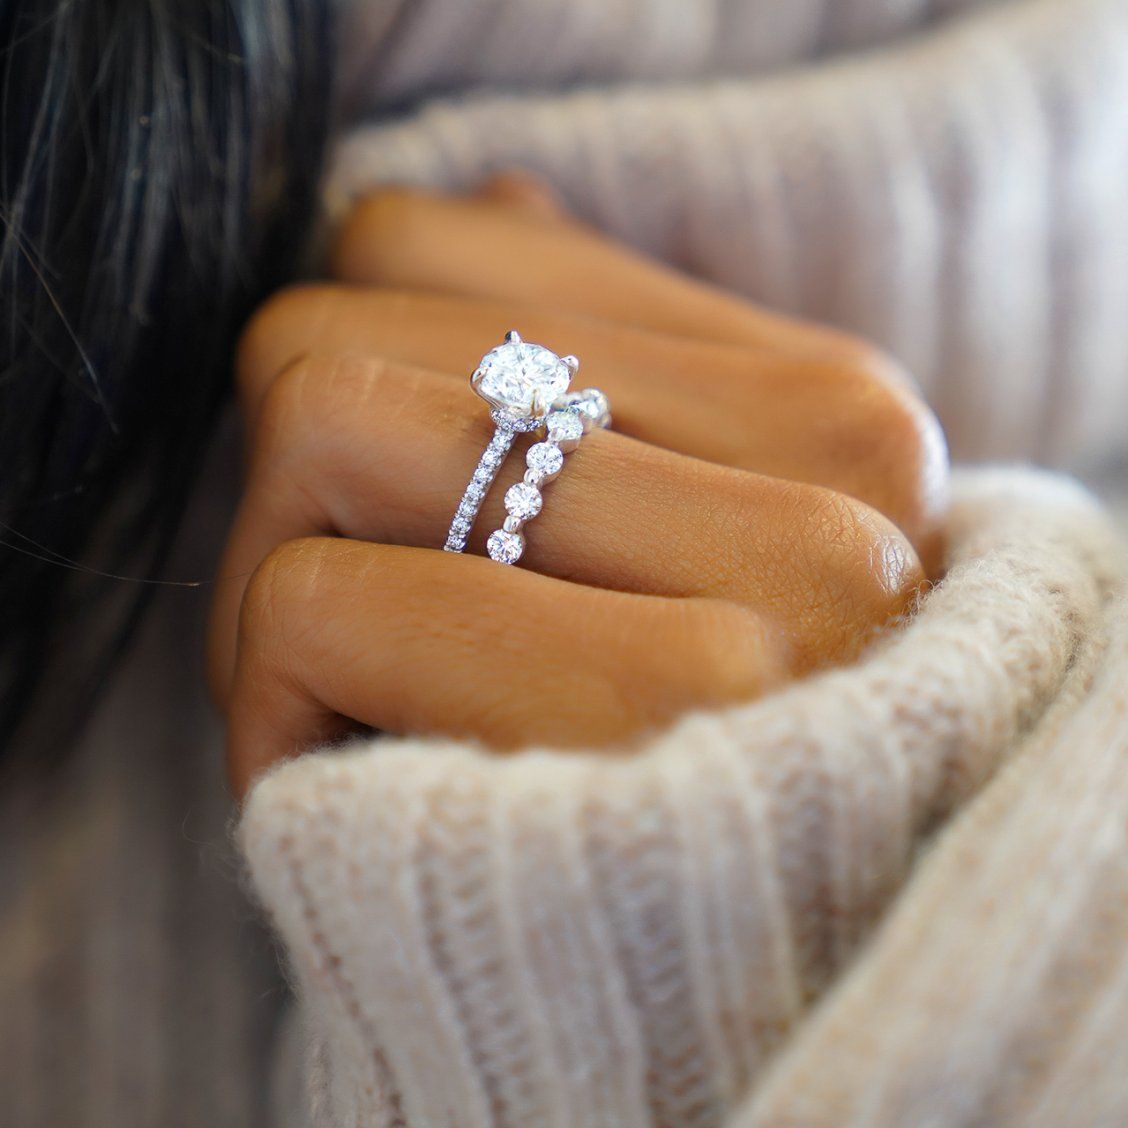 Tips to Choose the Kinds of Diamond Engagement Rings